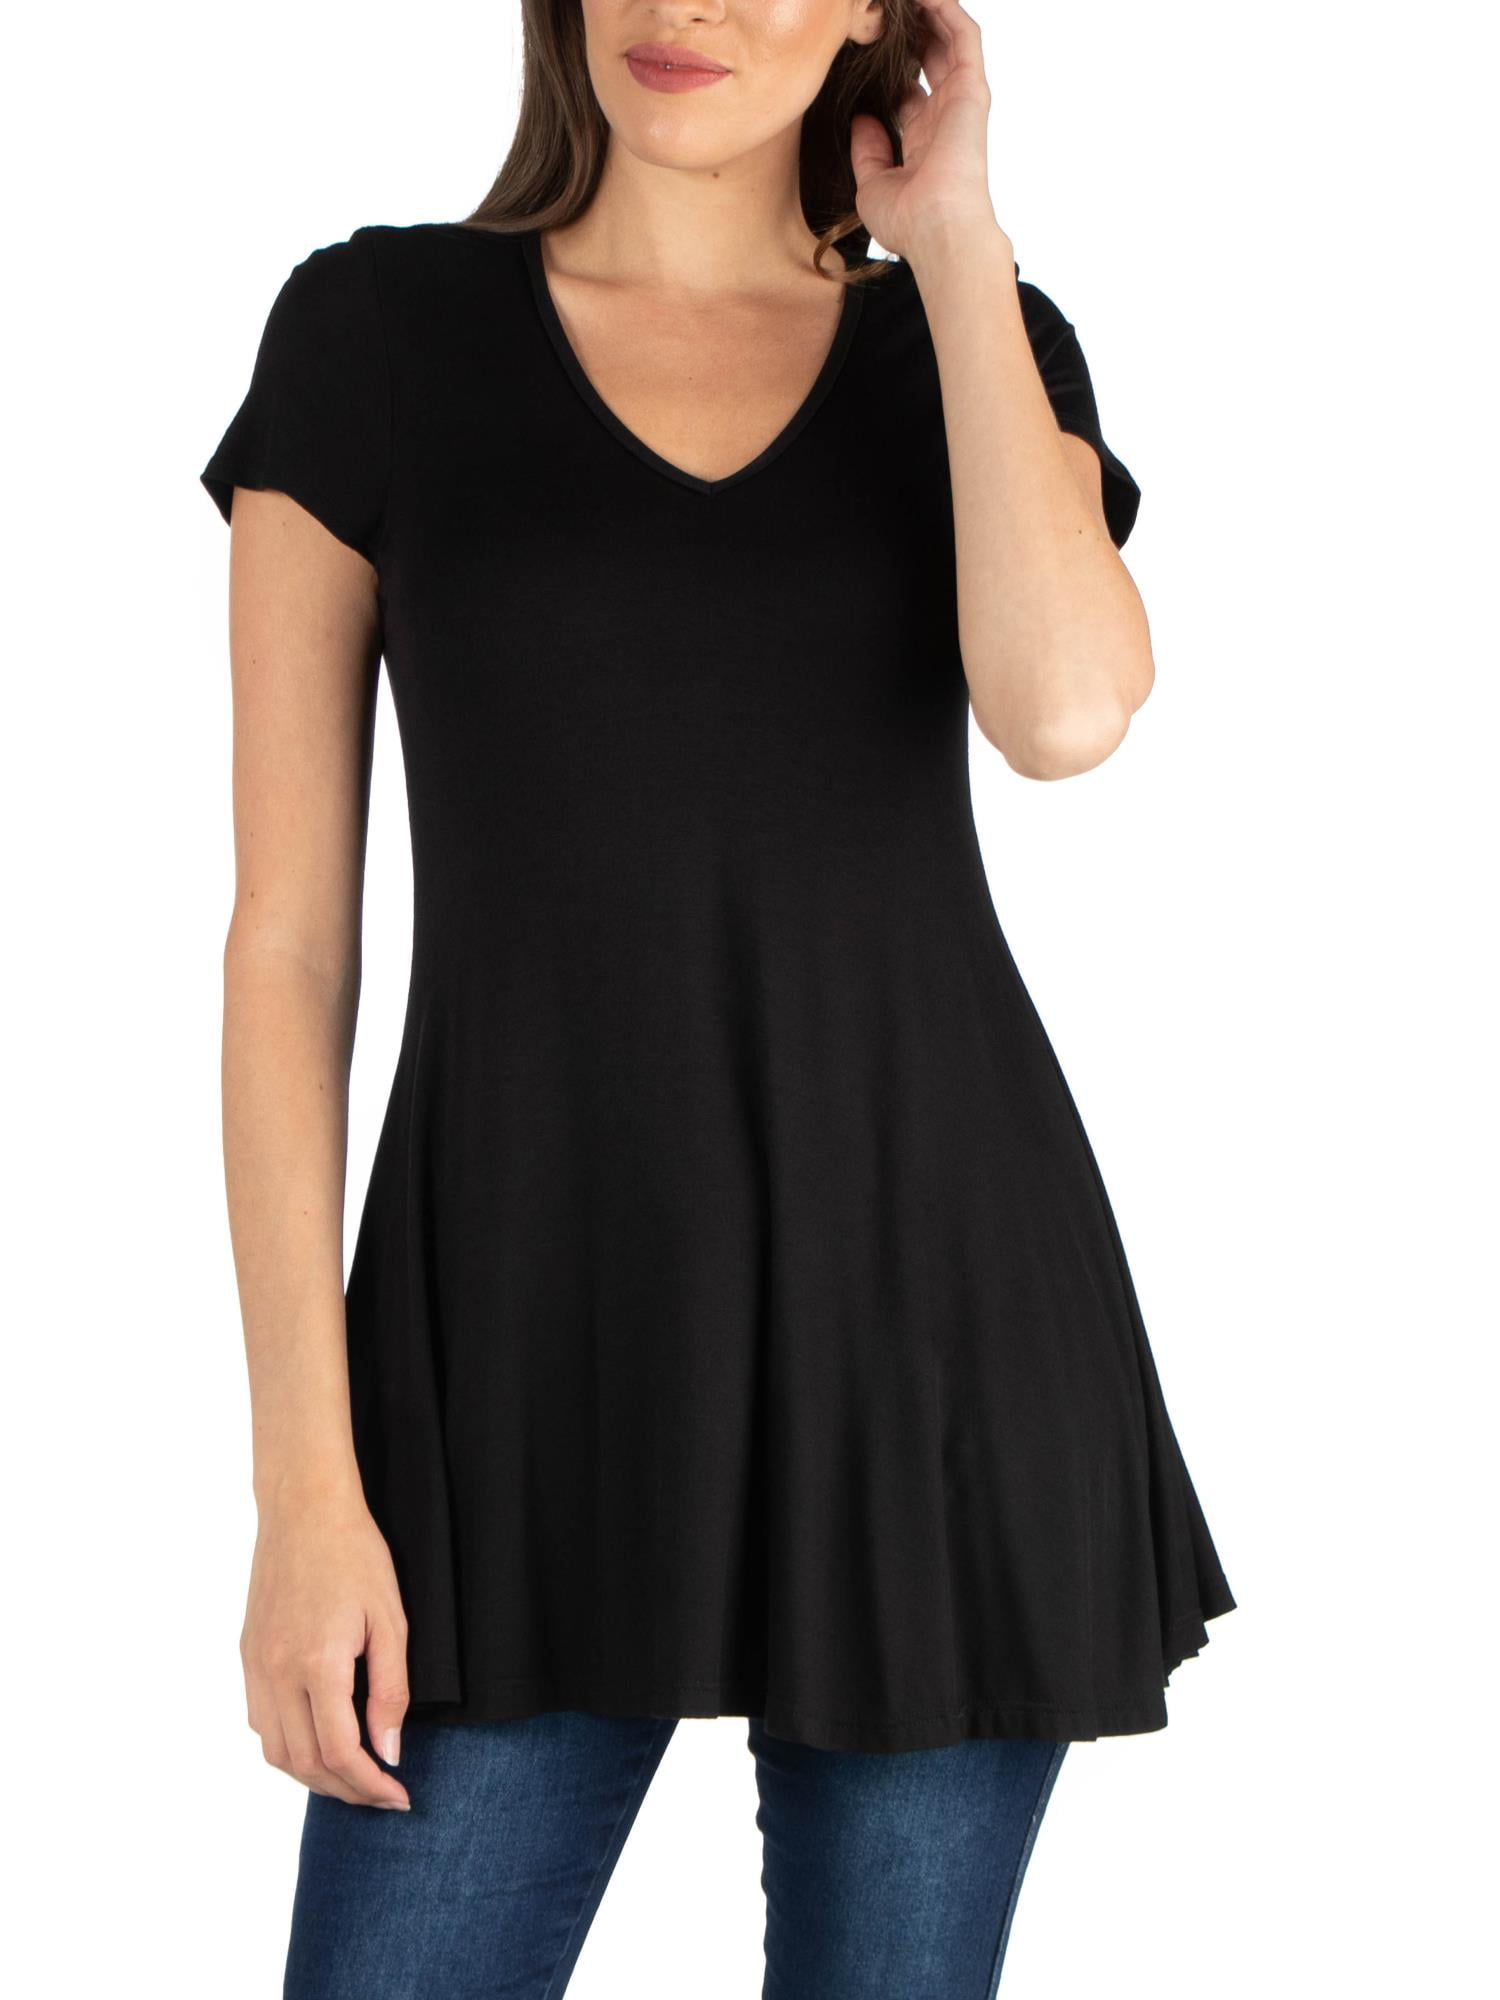 24/7 Comfort Apparel Women's's Short Sleeve Loose Fit Tunic Top with V ...